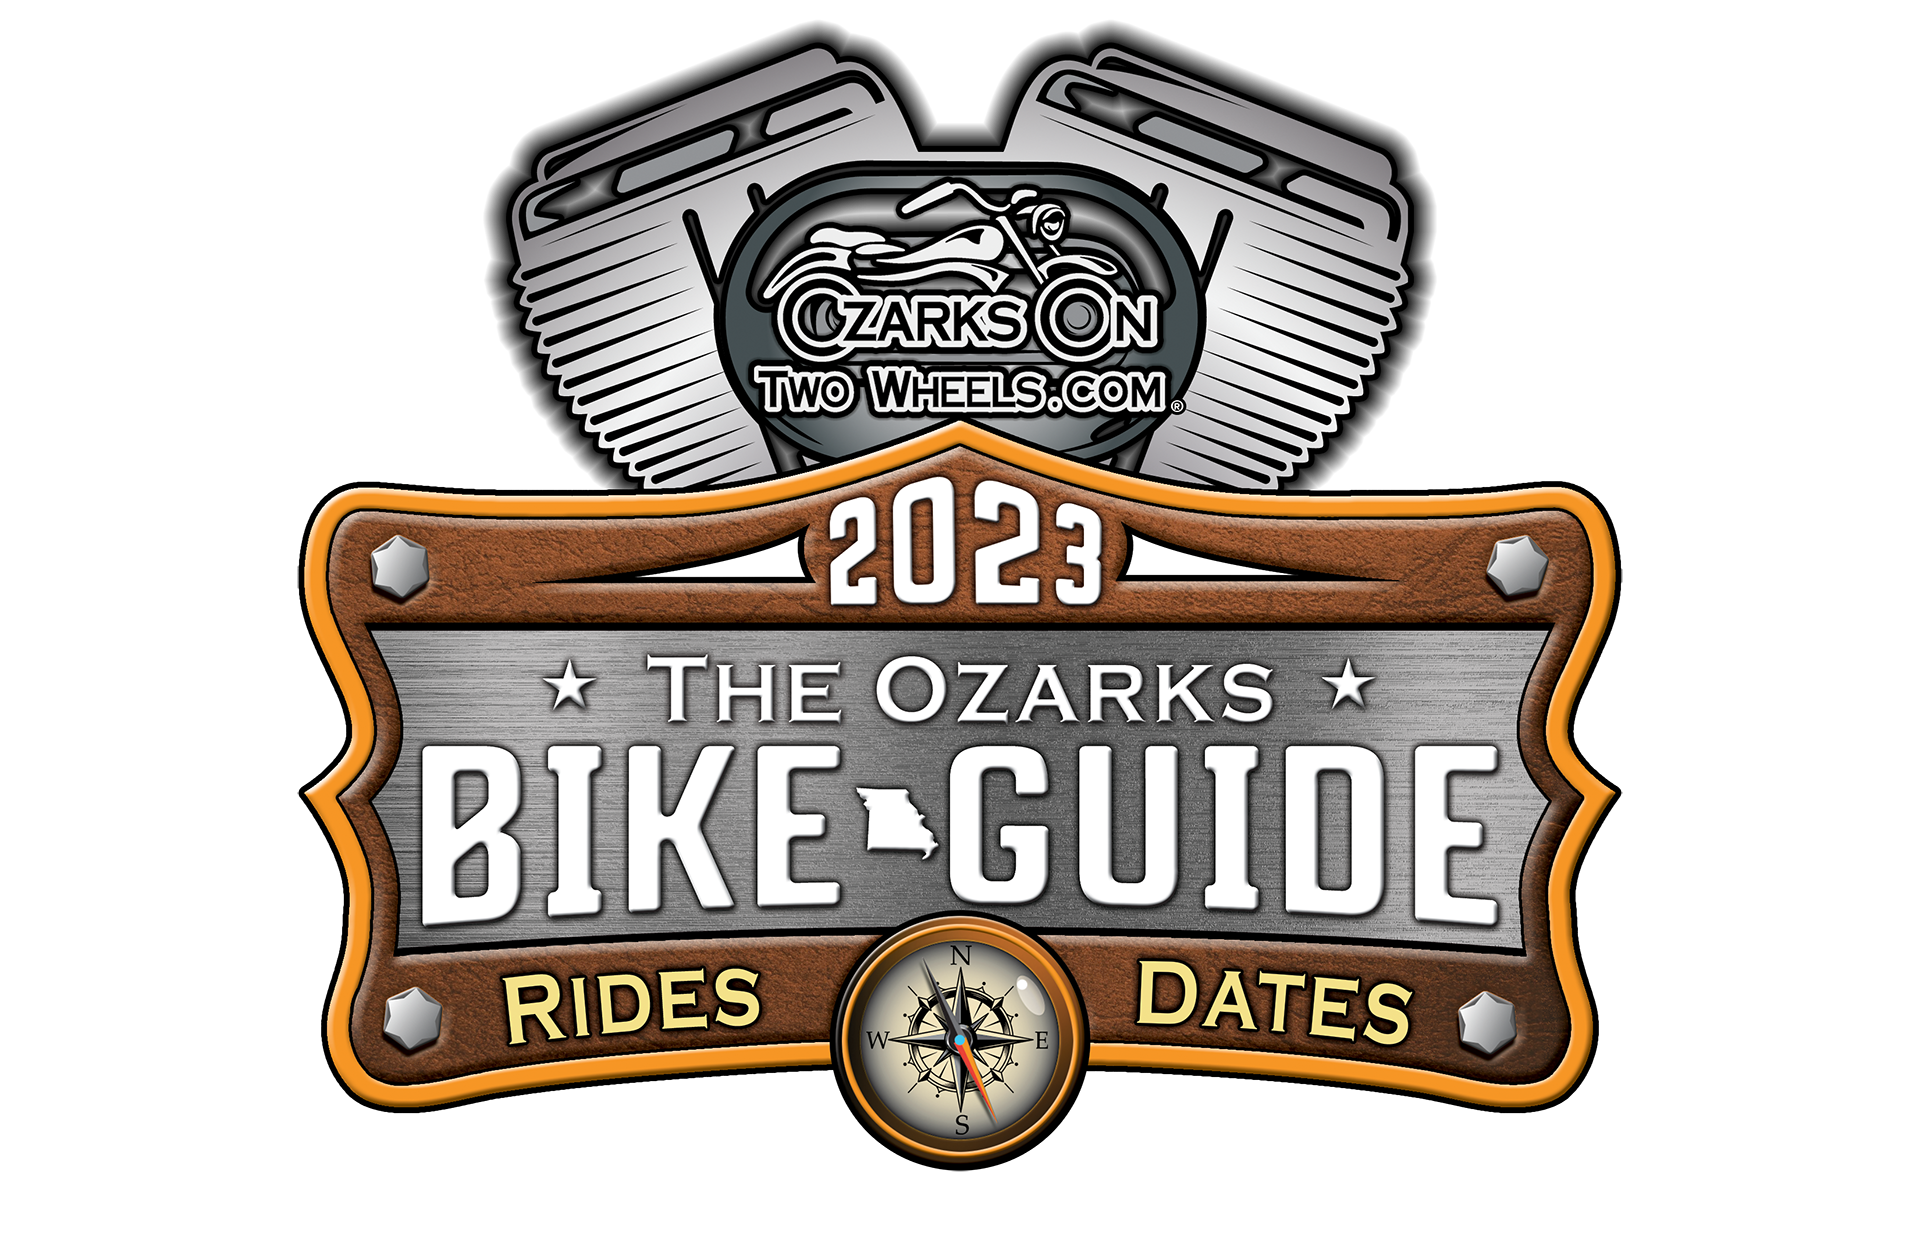 Ozarks On Two Wheels You haven't ridden until you ride the Ozarks On